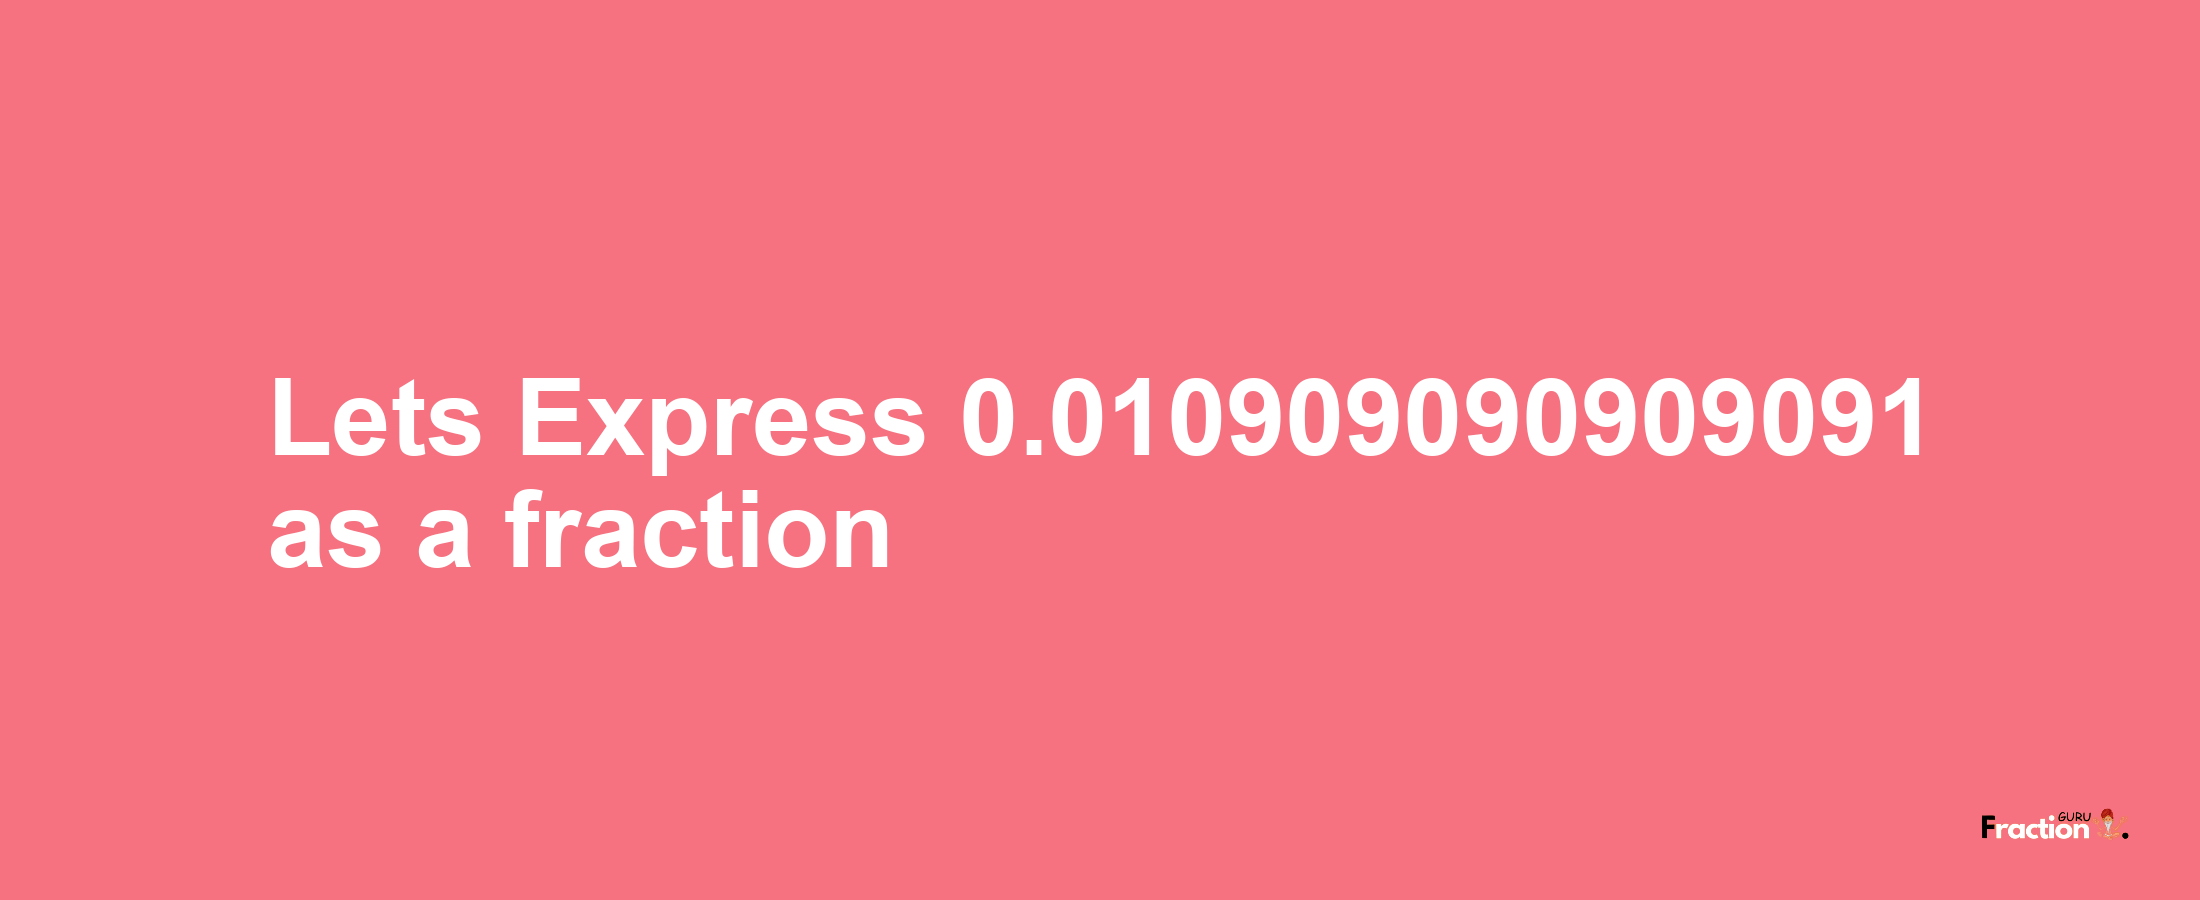 Lets Express 0.010909090909091 as afraction